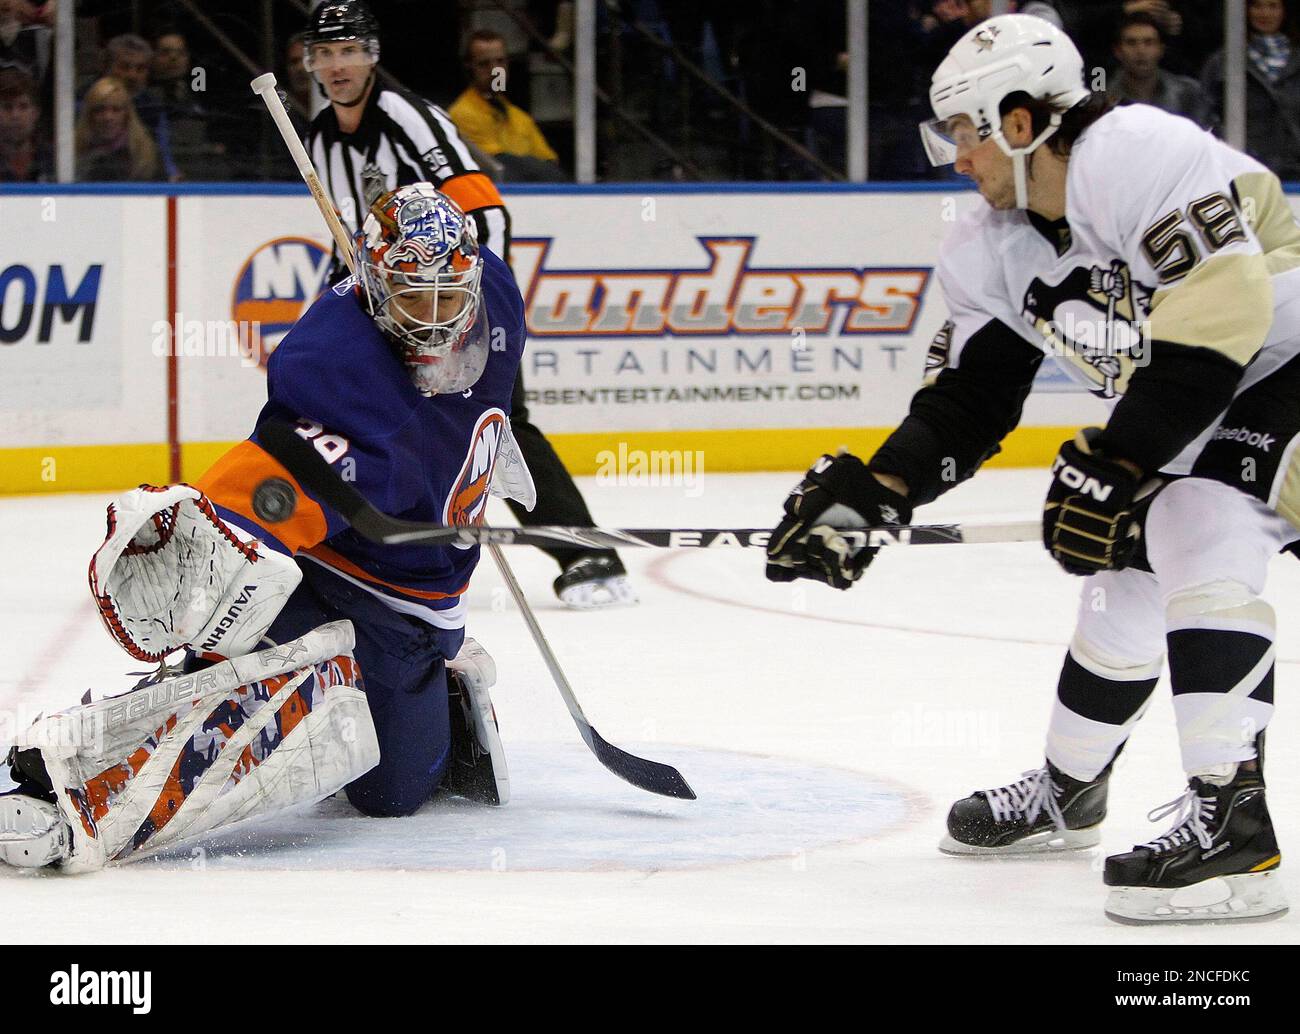 New York Islanders goalie Rick DiPietro (39) makes a penalty shot save by  stopping Pittsburgh Penguins defenseman Kris Letang's shot in the third  period of their NHL hockey game at Nassau Coliseum